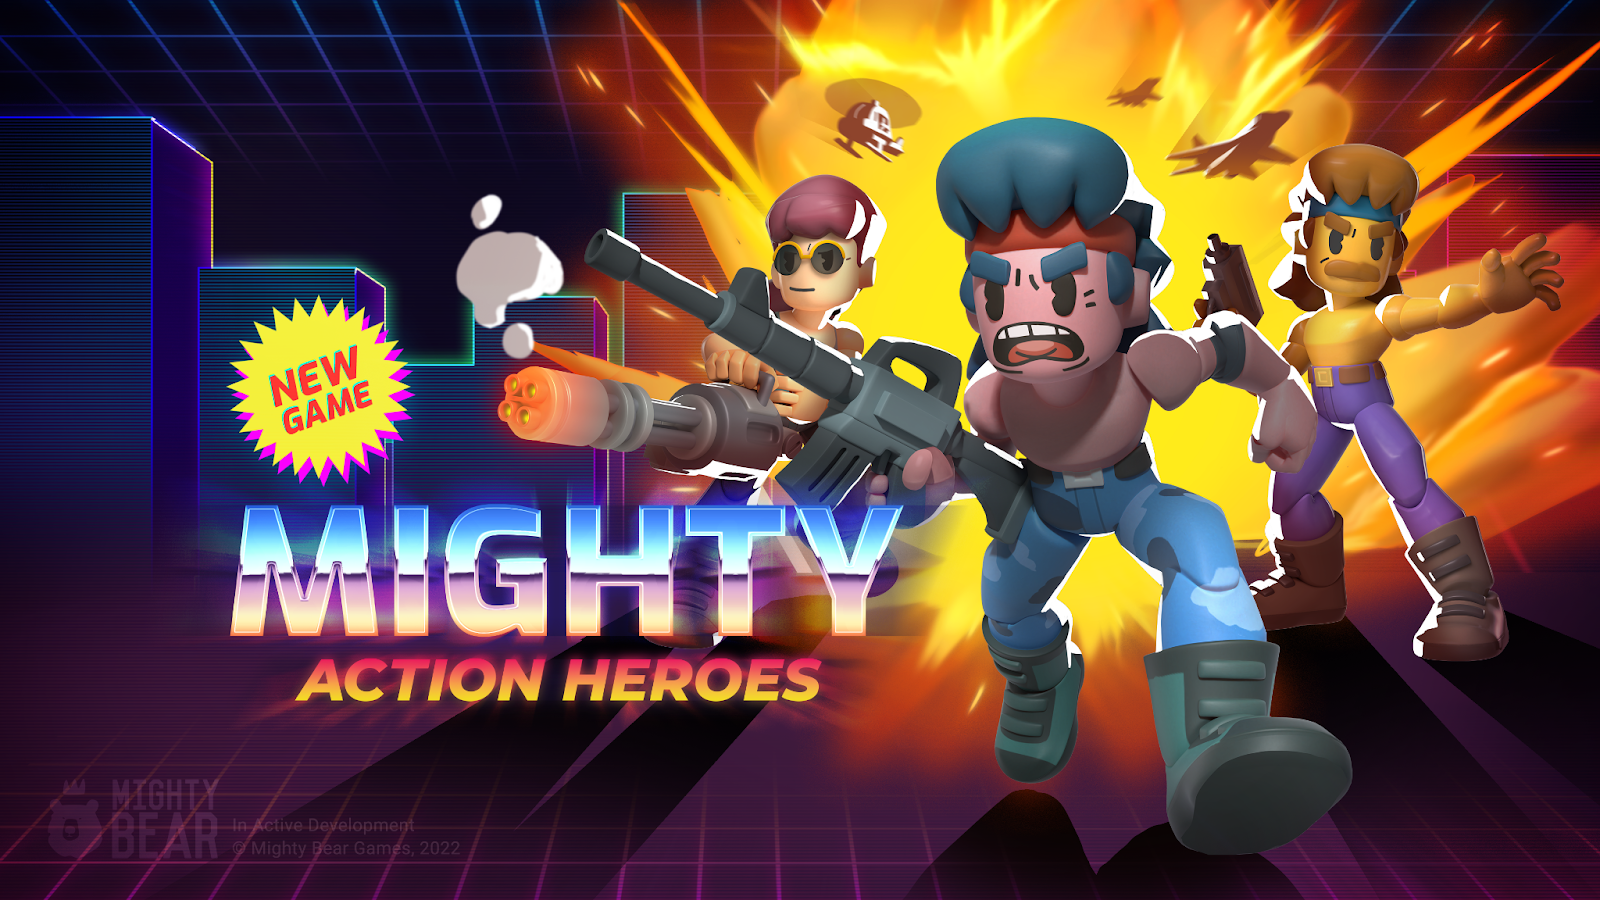 Avocado DAO participates in Early Access of Mighty Action Heroes